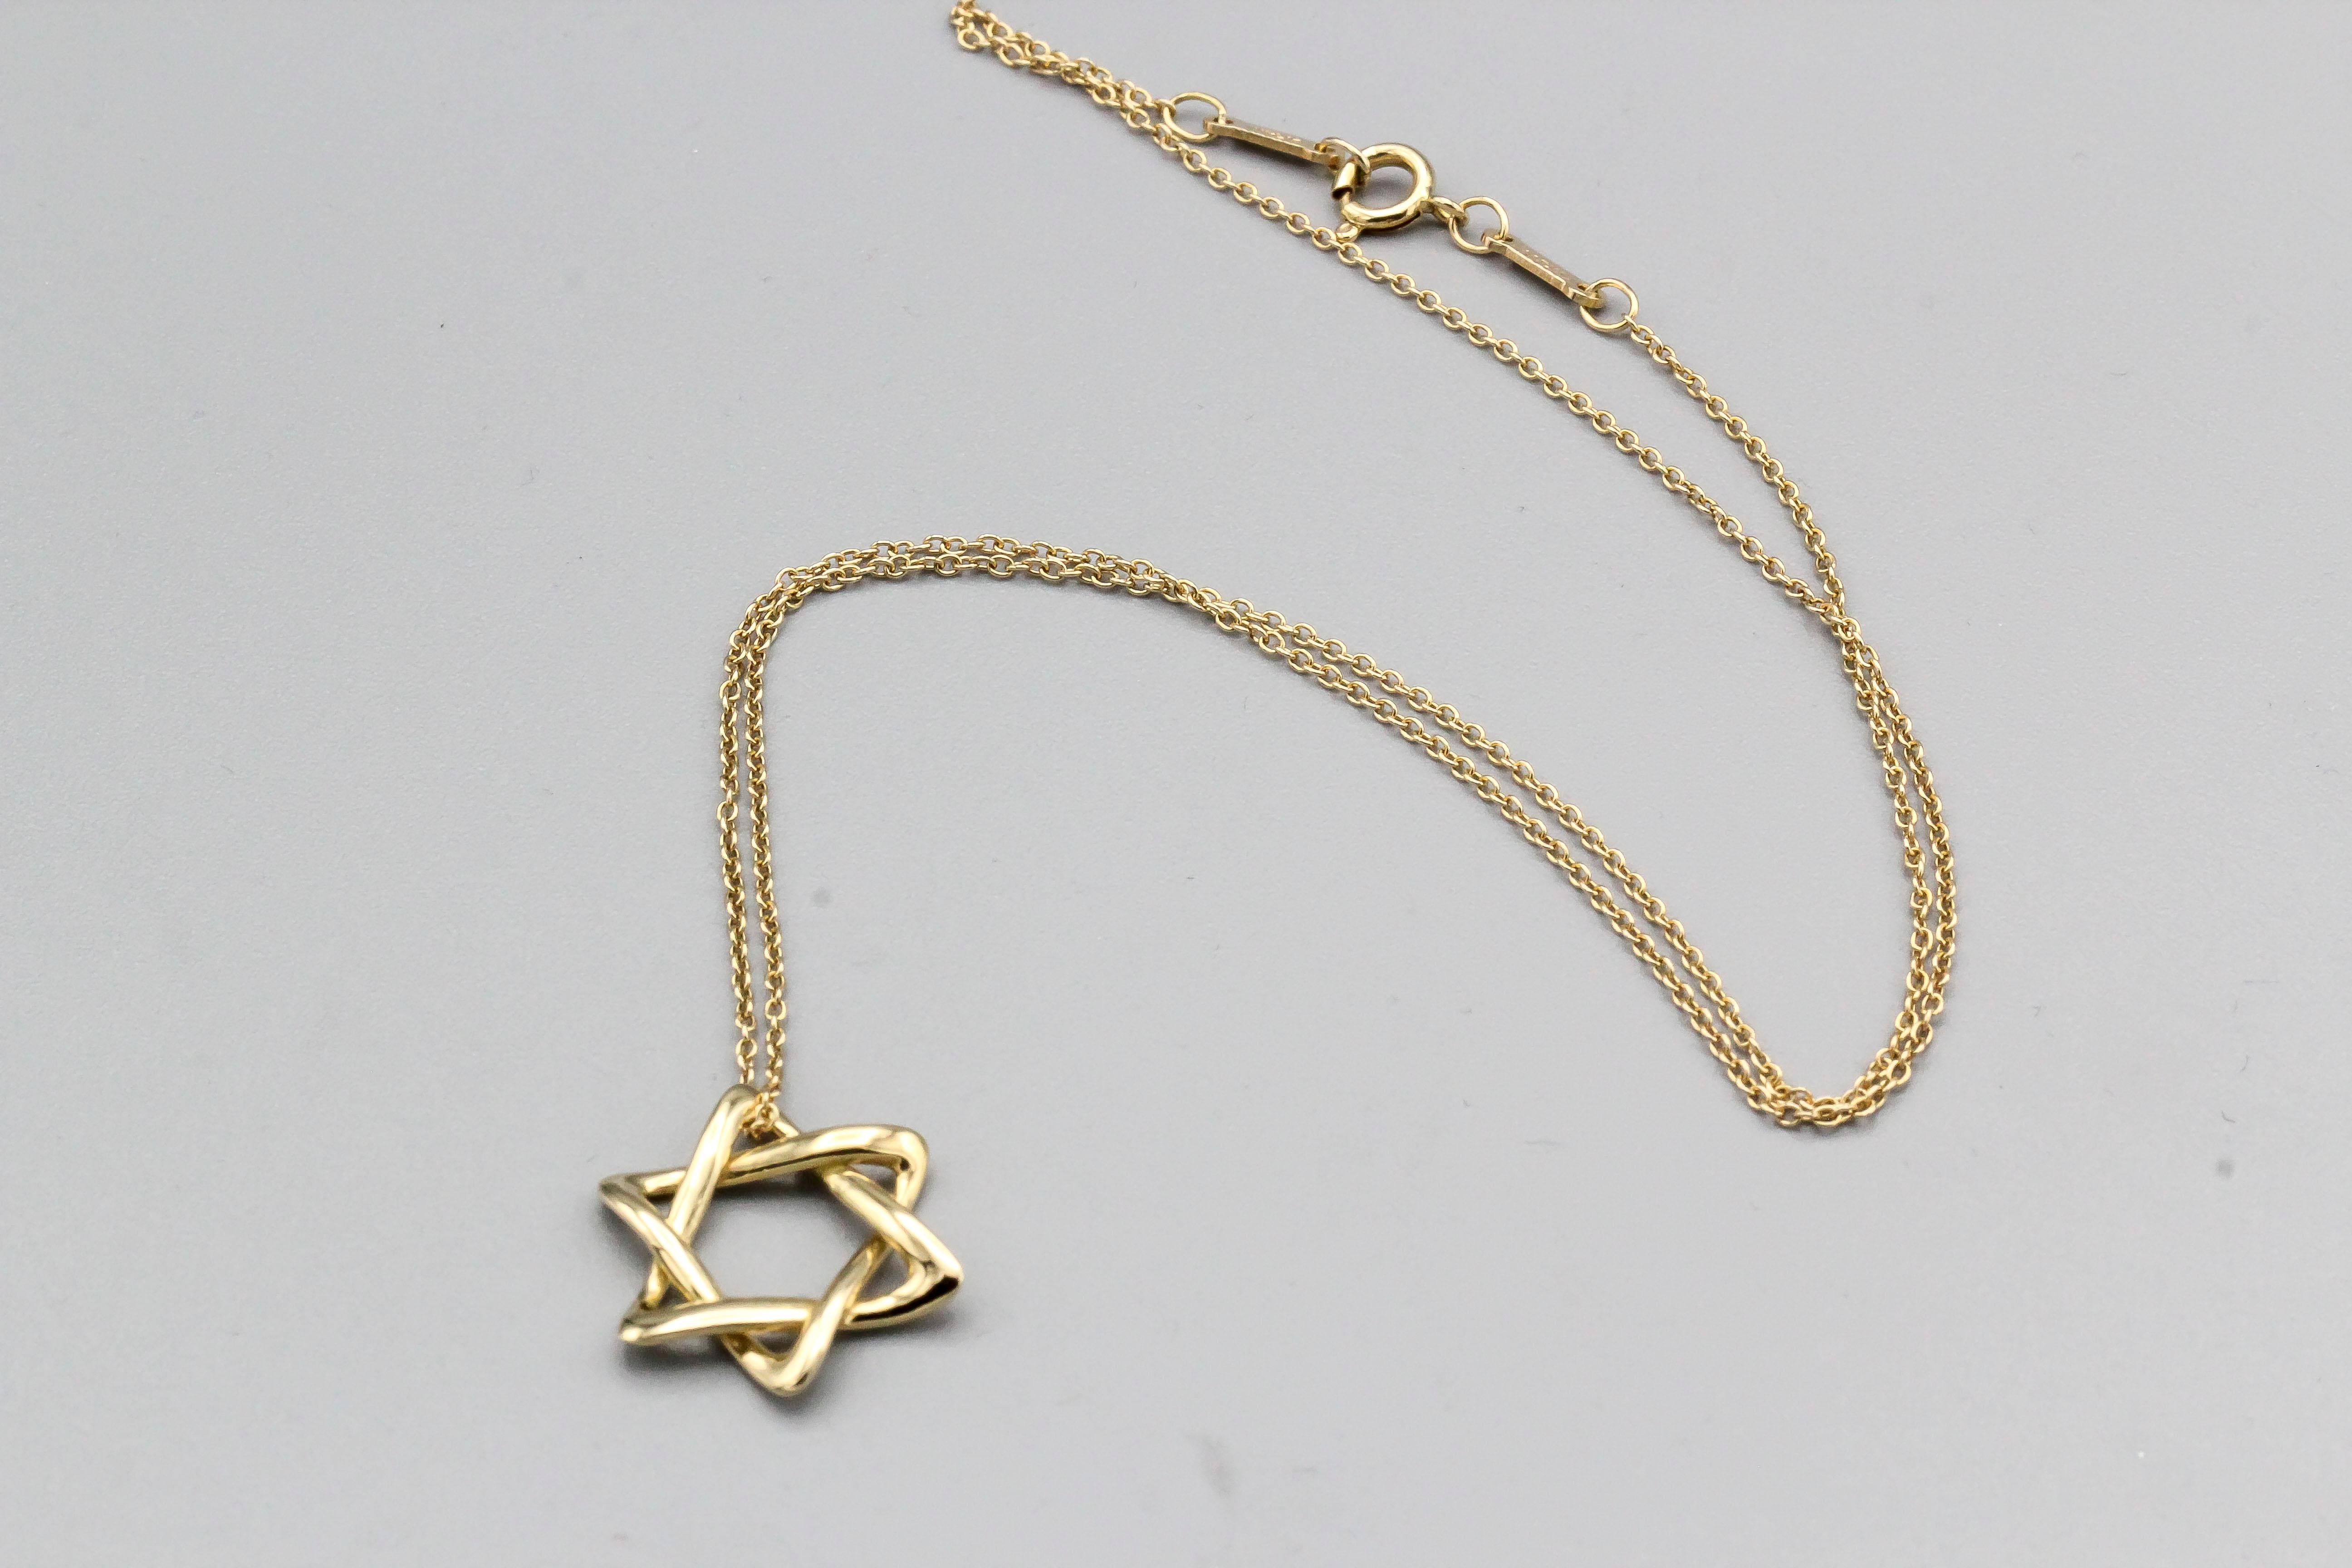 Elegant 18K yellow gold David's Star necklace by Tiffany & Co., Elsa Peretti. This is the larger  of two sizes and currently retails for $1150. Chain length is 16